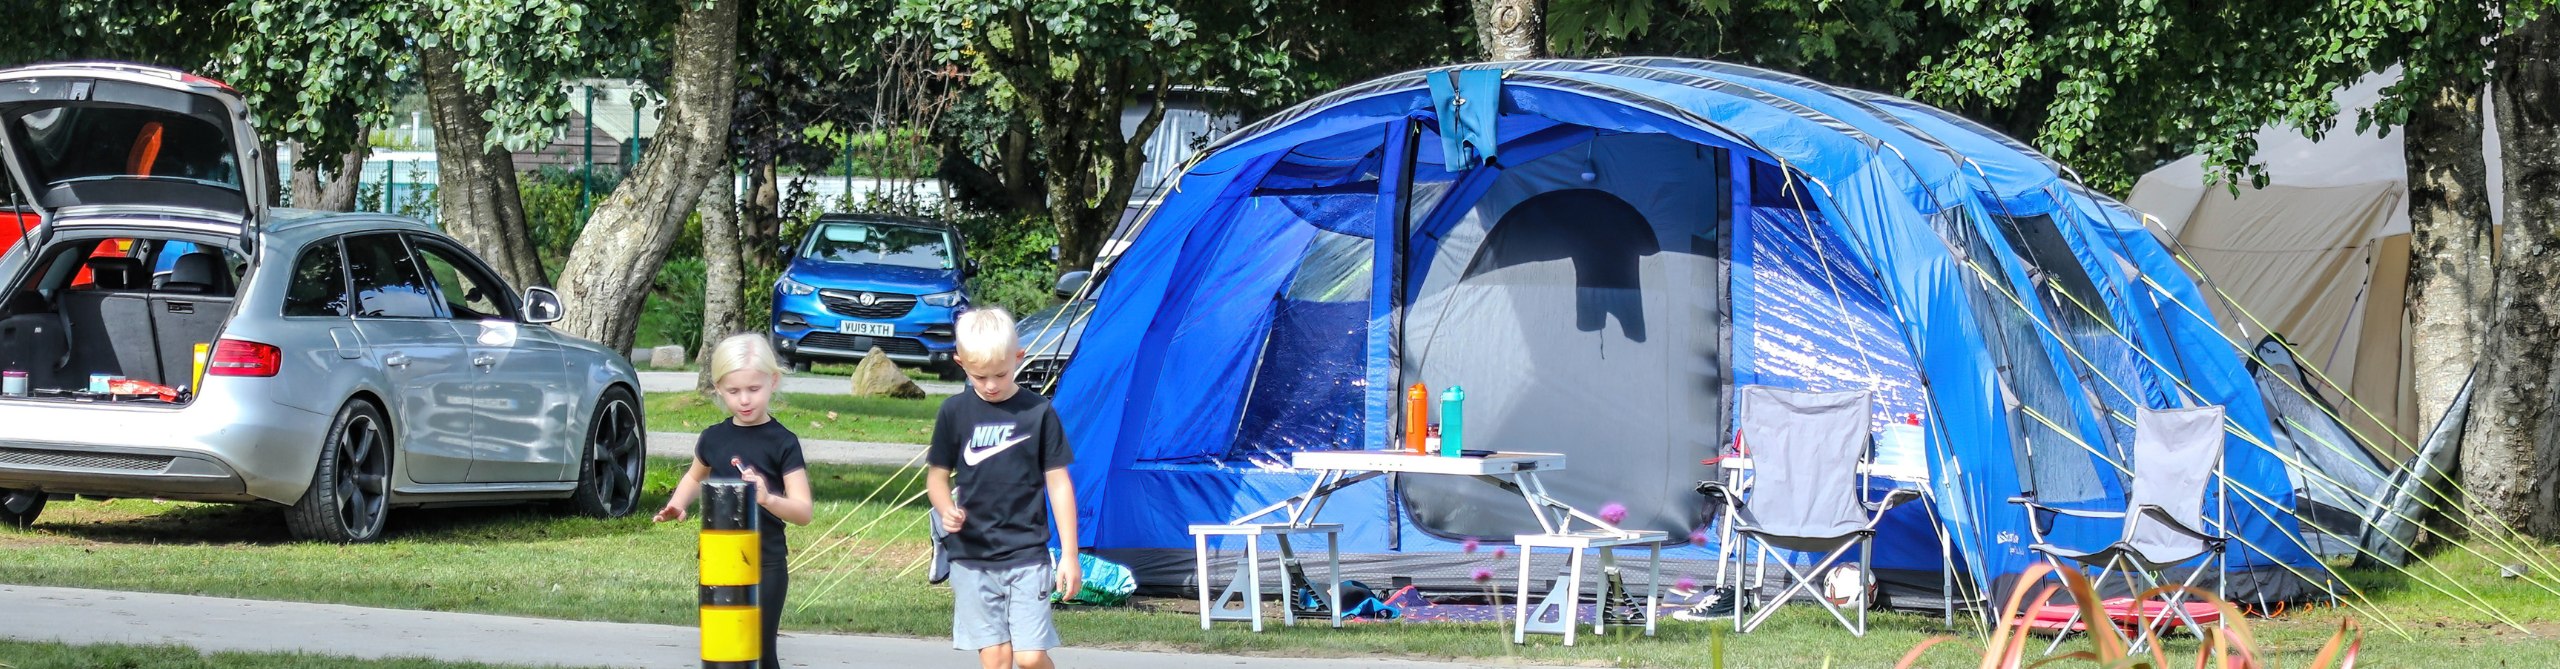 Two boys walking near a large blue camping tent with an open front, next to a parked car in a grassy camping area at Monkey Tree Holiday Park in Cornwall, with trees and another car in the